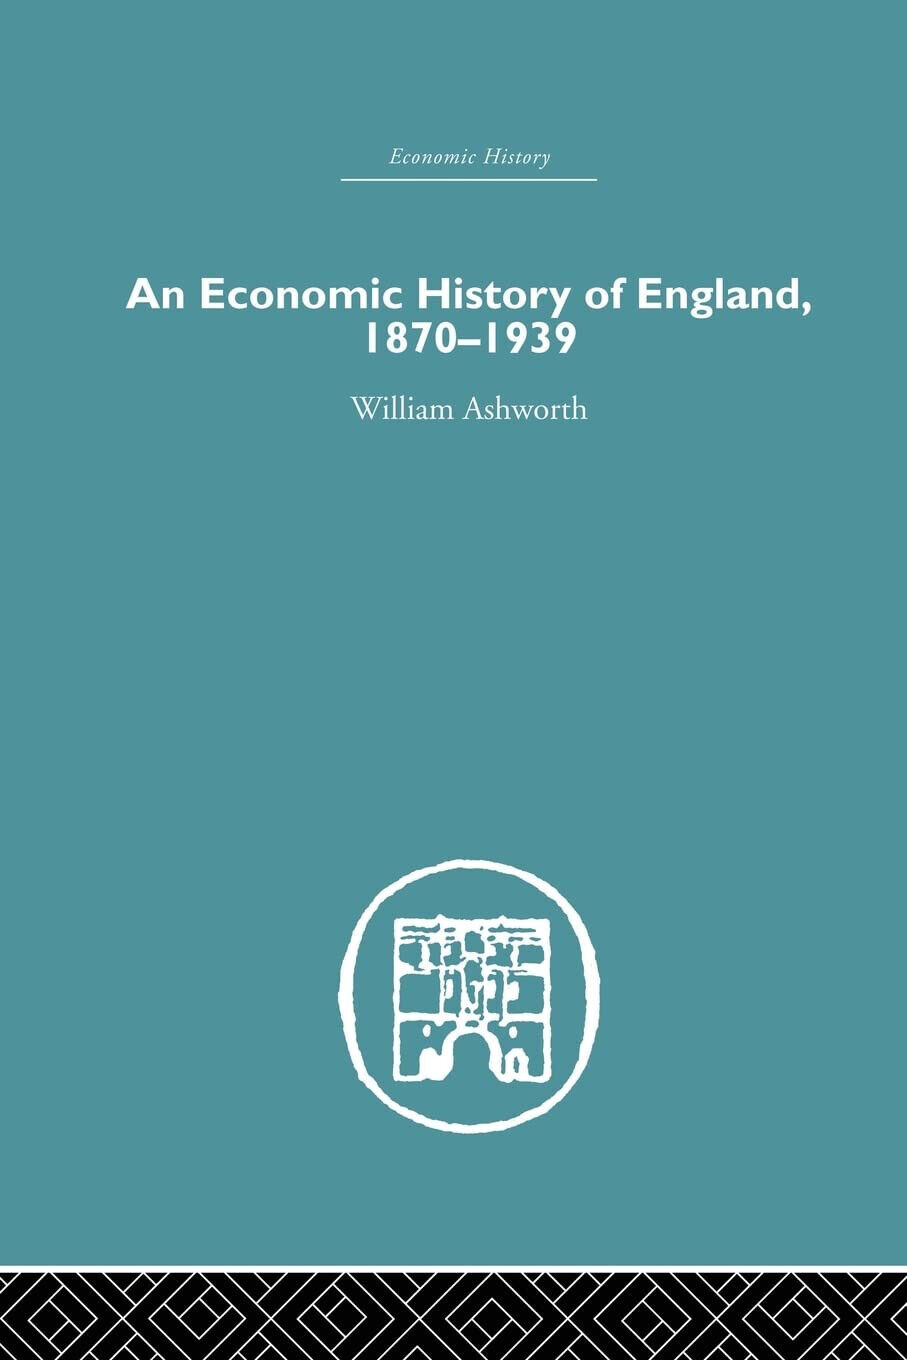 An Economic History of England 1870-1939 - William Ashworth - Routledge, 2015